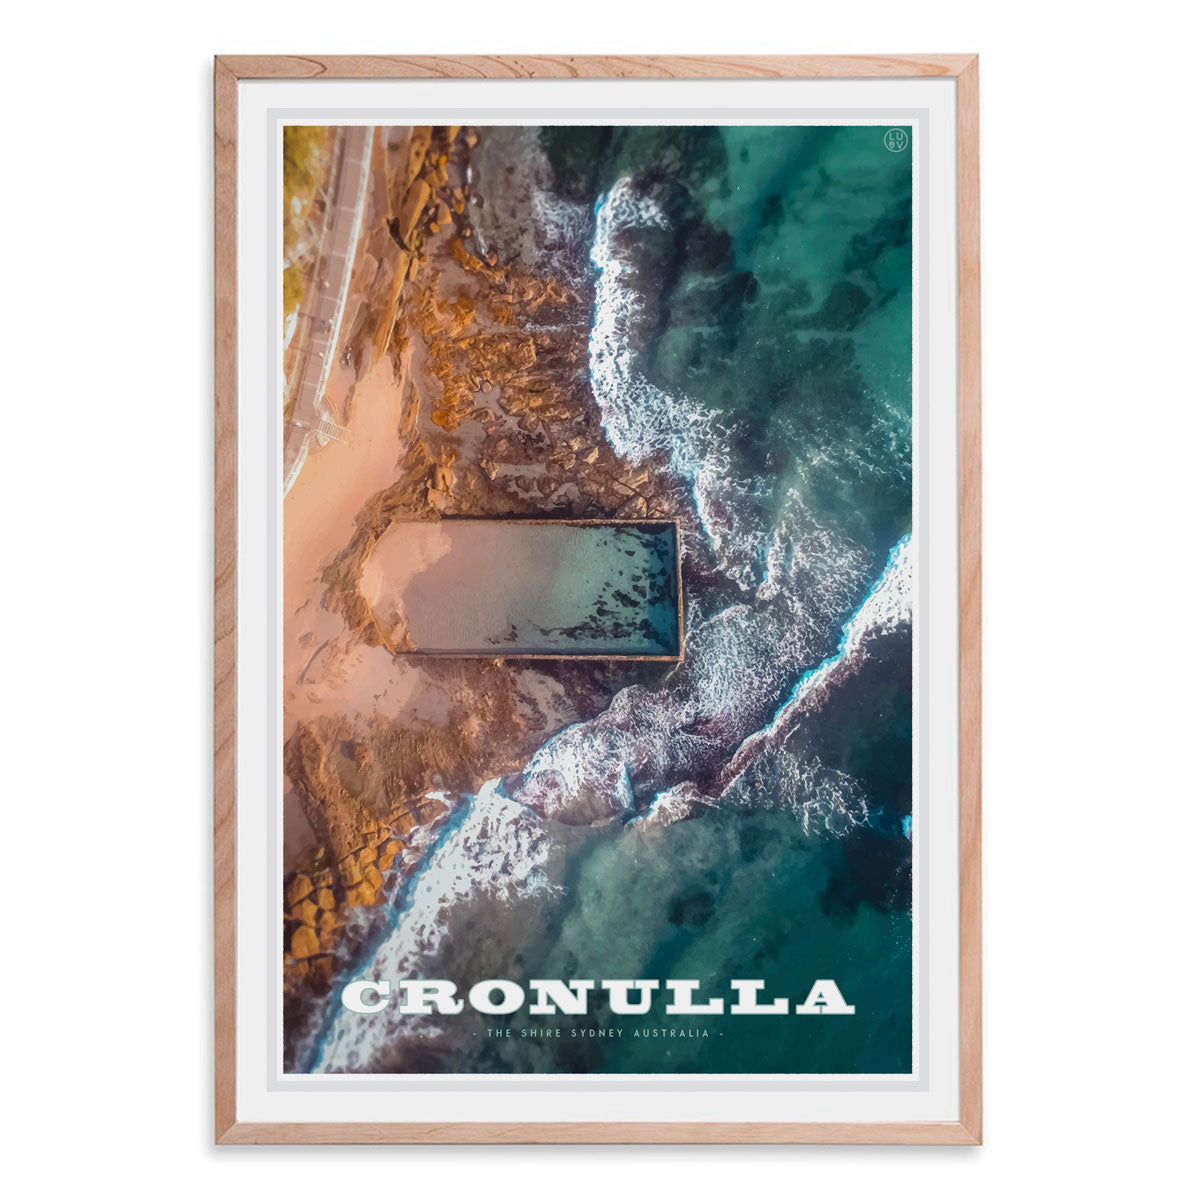 Cronulla oak framed print travel style by places we luv